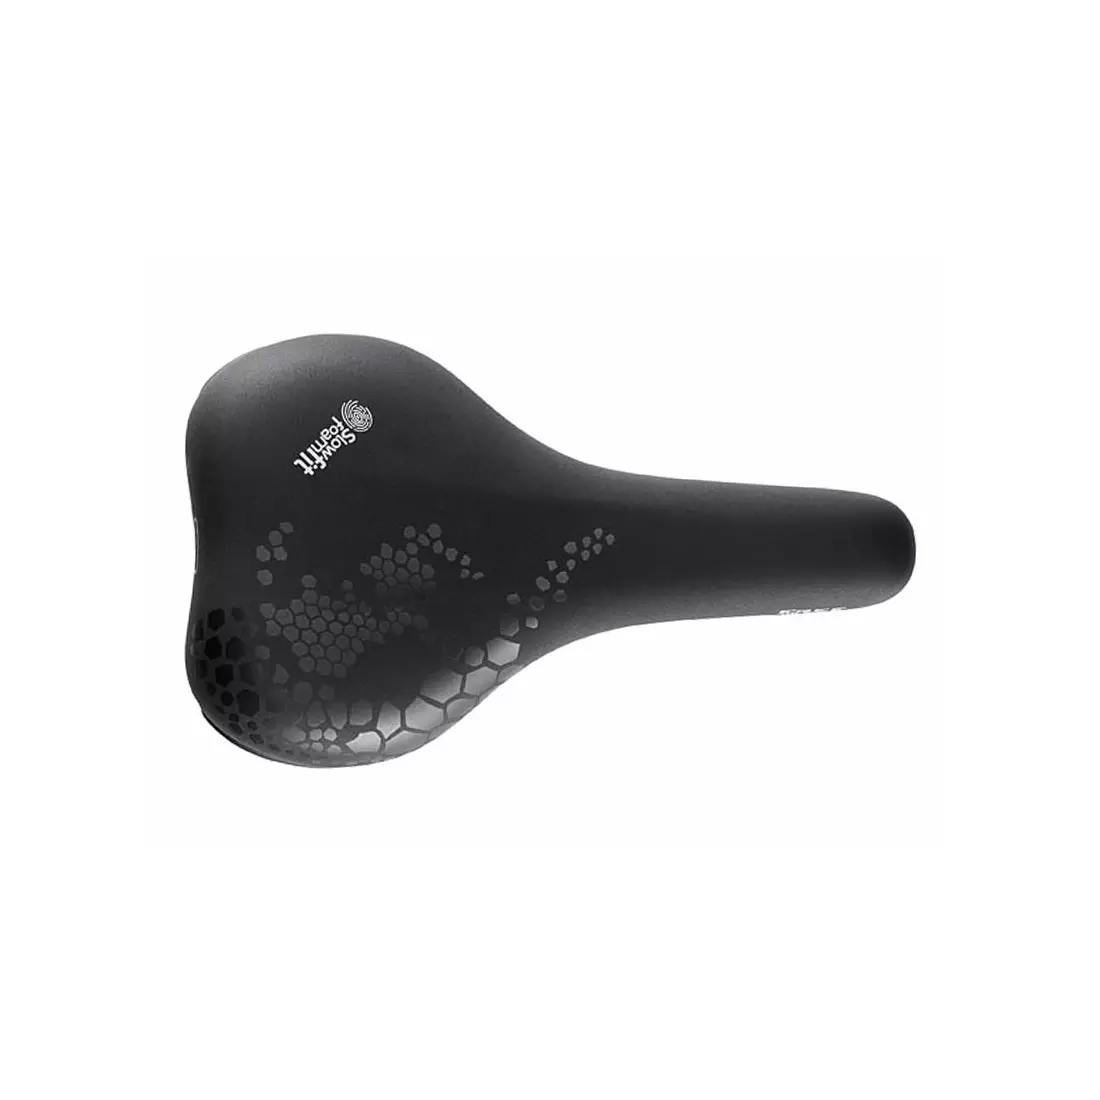 Men bicycle saddle SELLEROYAL CLASSIC MODERATE 60st. FREEWAY FIT SR-8V97HR0A08069